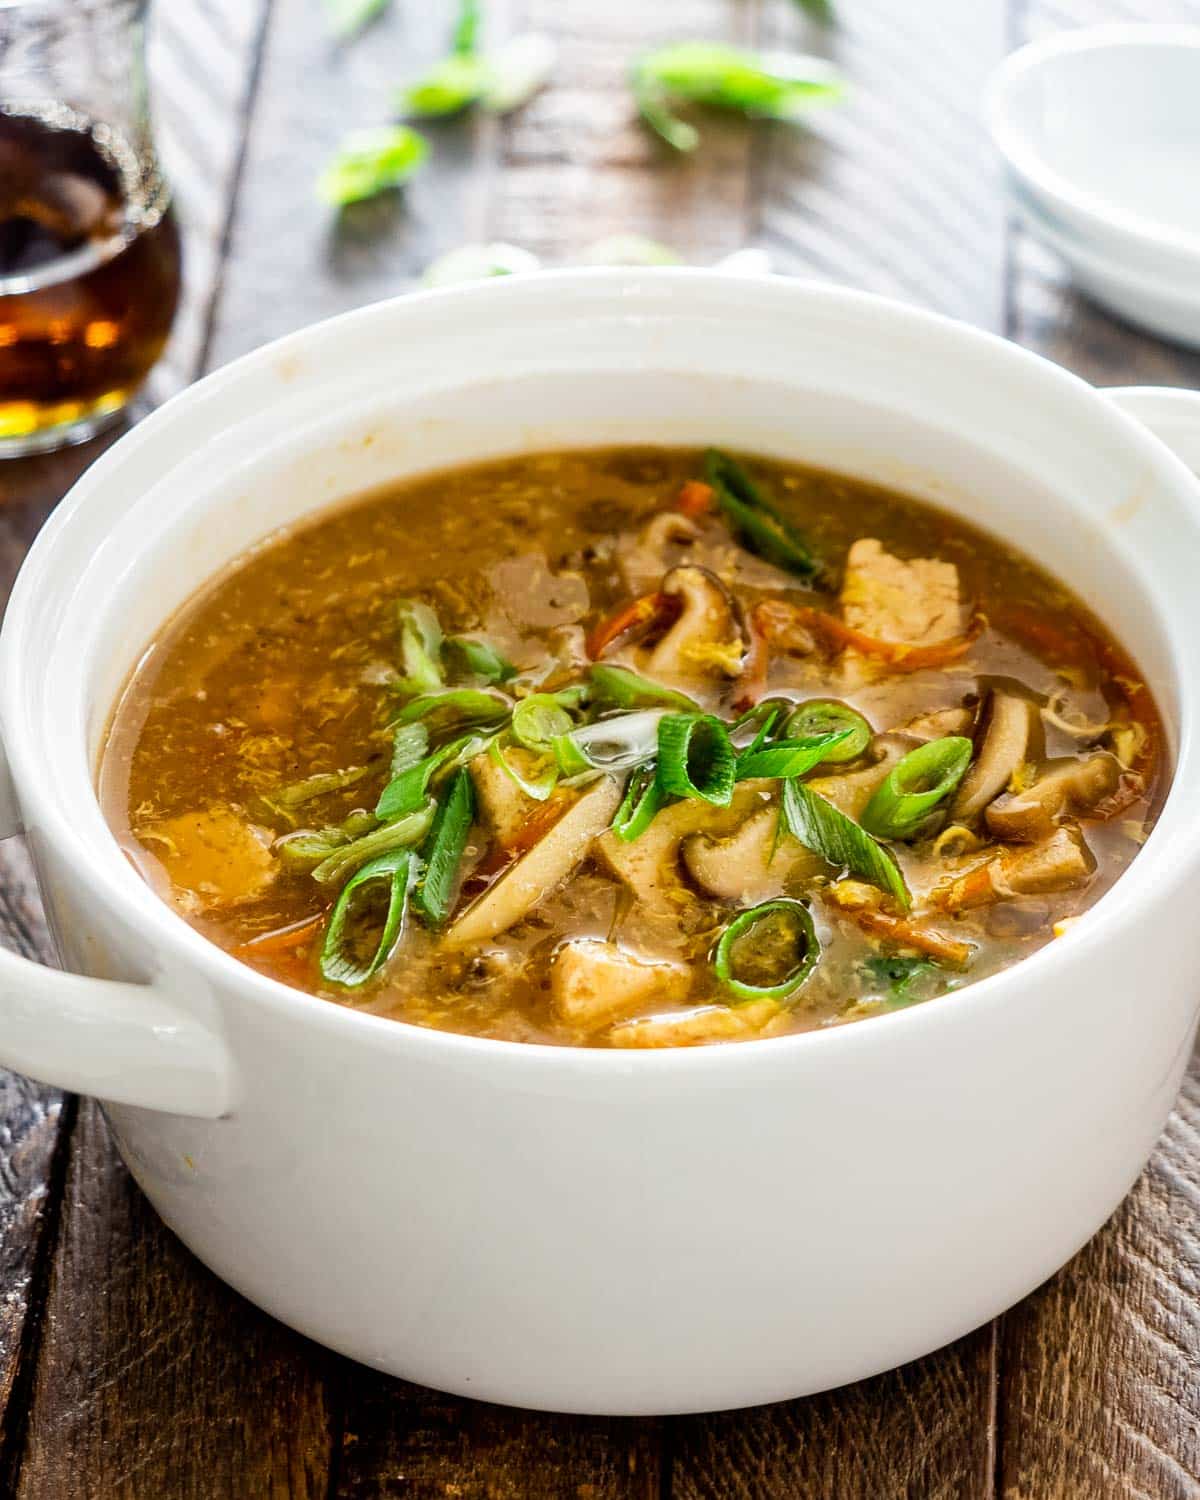 hot and sour soup in a white bowl garnished with green onions.